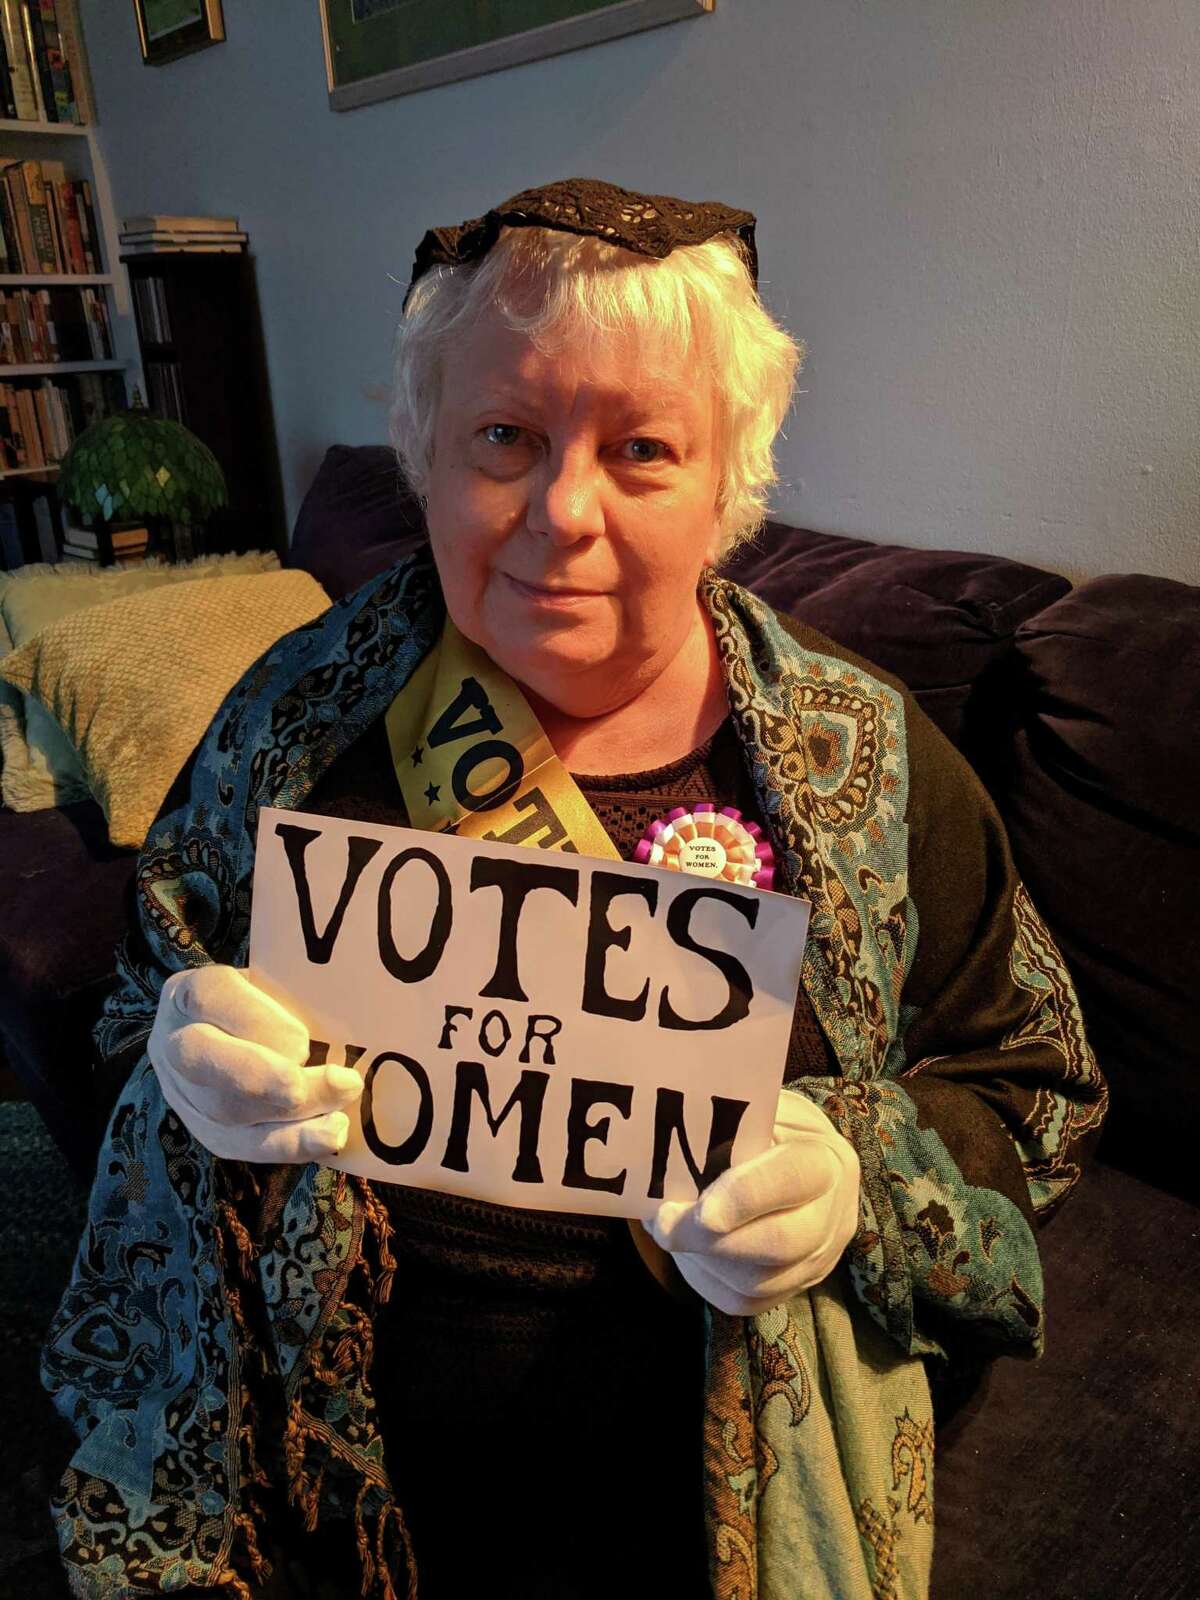 Lesley Keogh, a Wilton Library staff member, will channel her inner Elizabeth Cady Stanton, a founding mother of the women’s suffrage movement in a program titled: “Visit with Elizabeth Cady Stanton,” March 12, from 4 to 5 p.m.